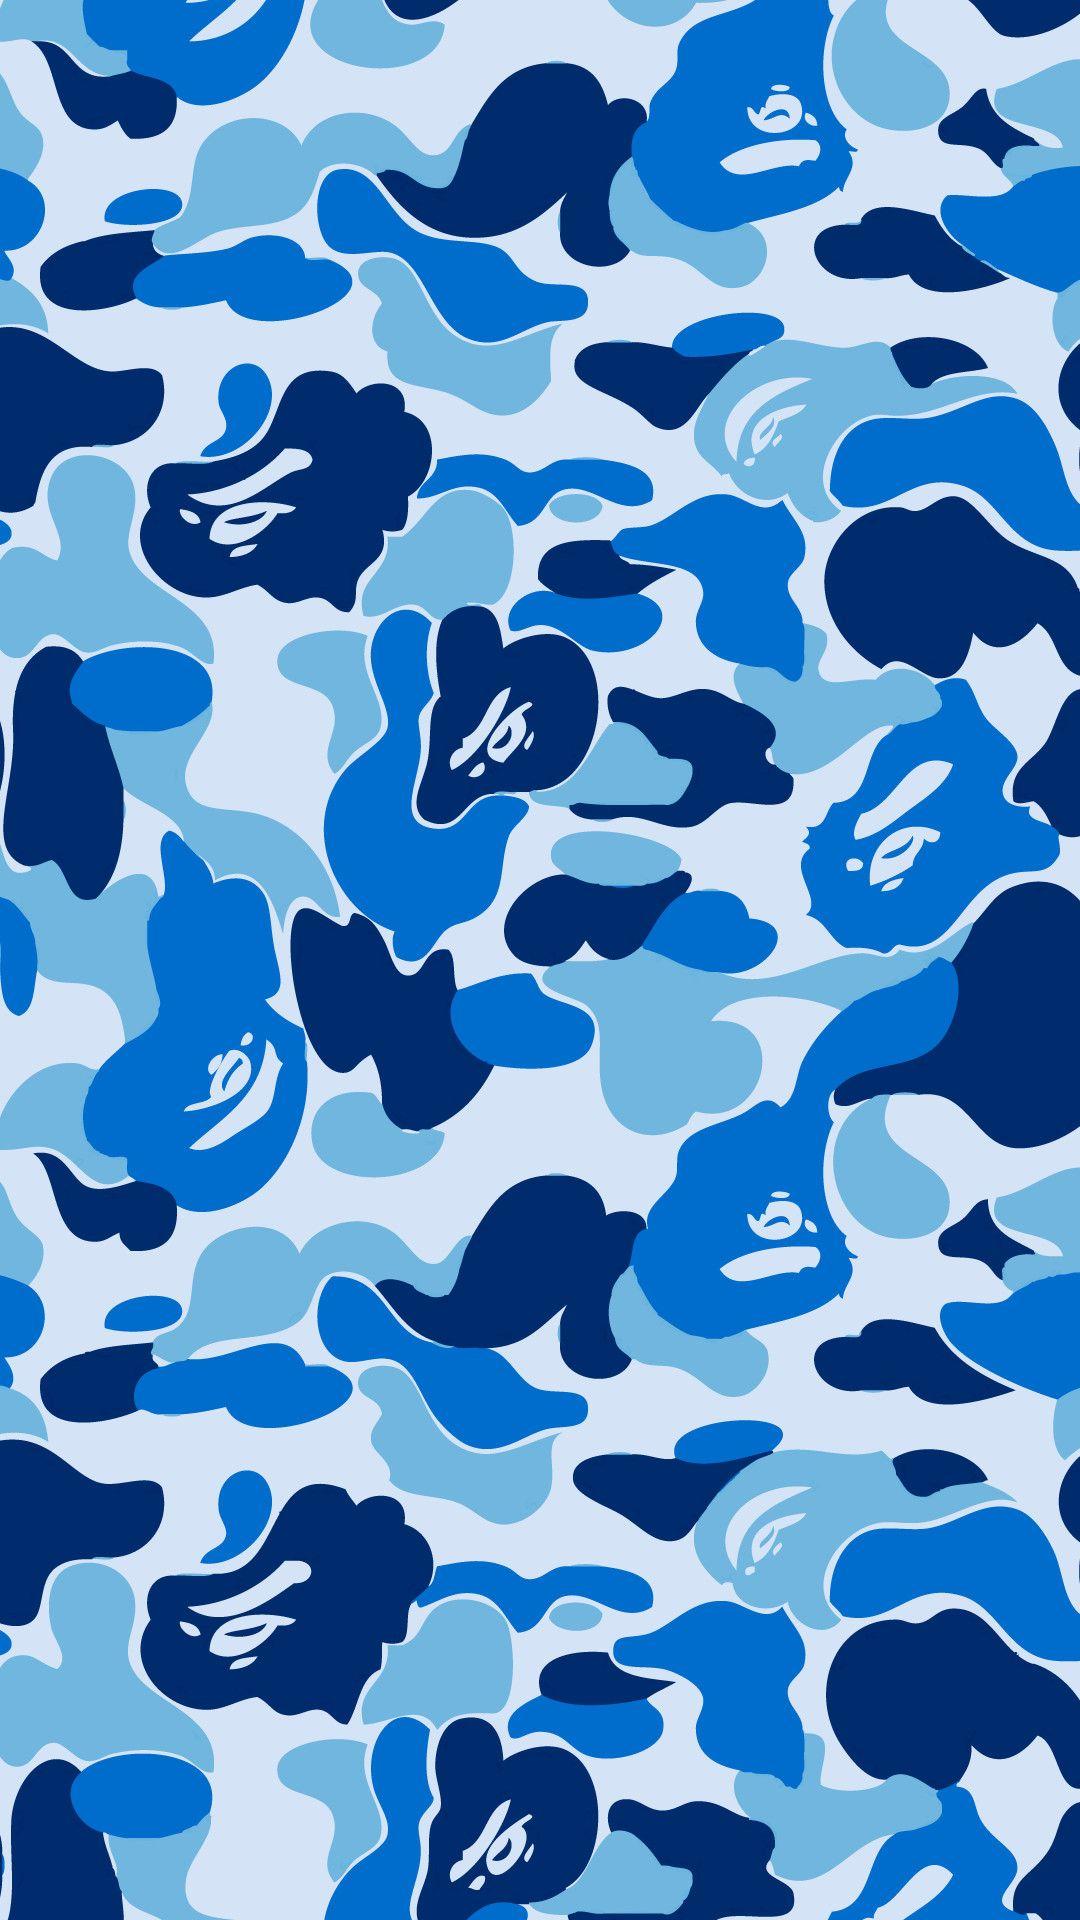 Bape Iphone 5s Wallpapers Top Free Bape Iphone 5s Backgrounds Wallpaperaccess